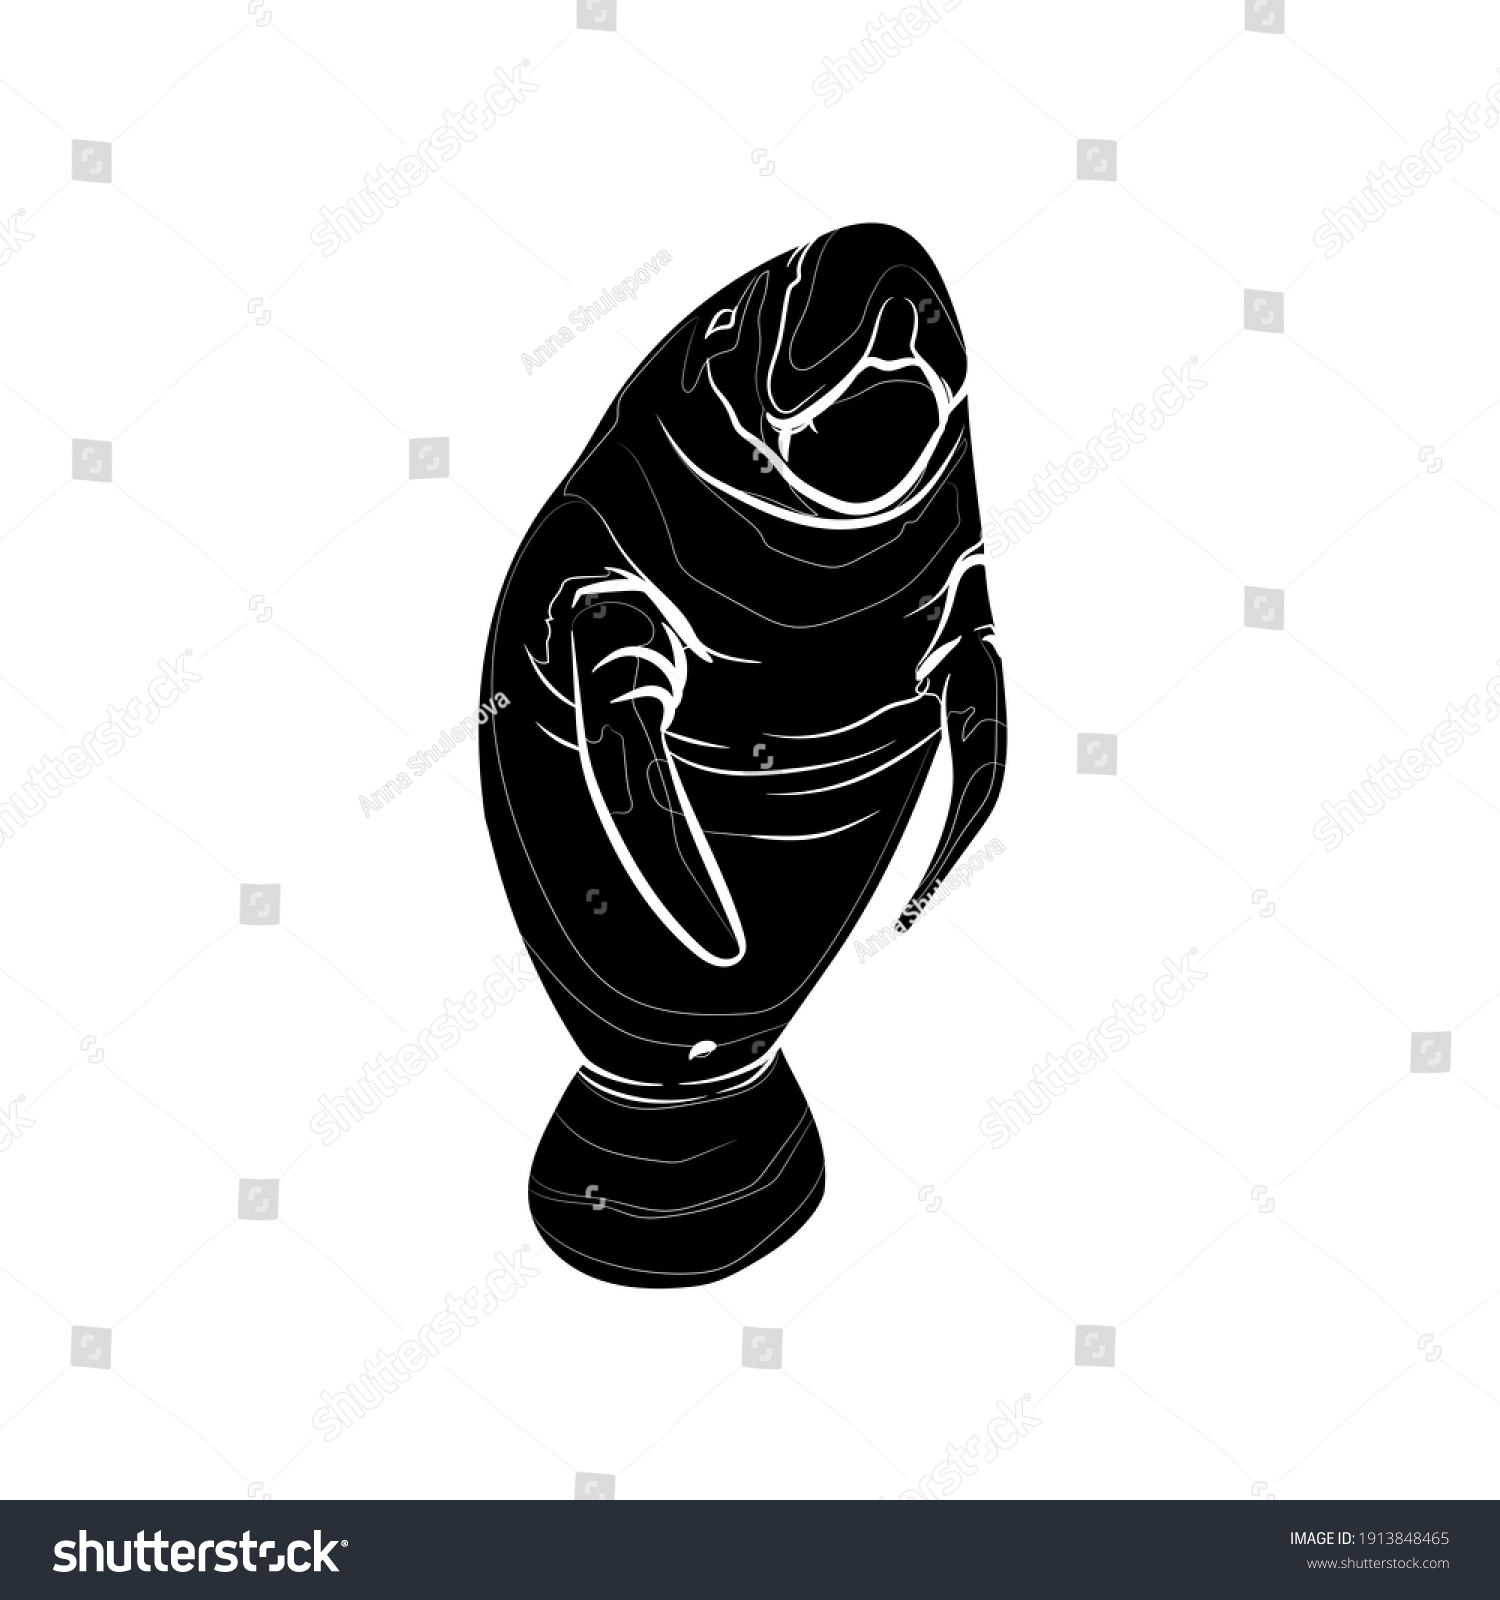 SVG of Silhouette of the manatee. Black and white illustration. Vector. svg